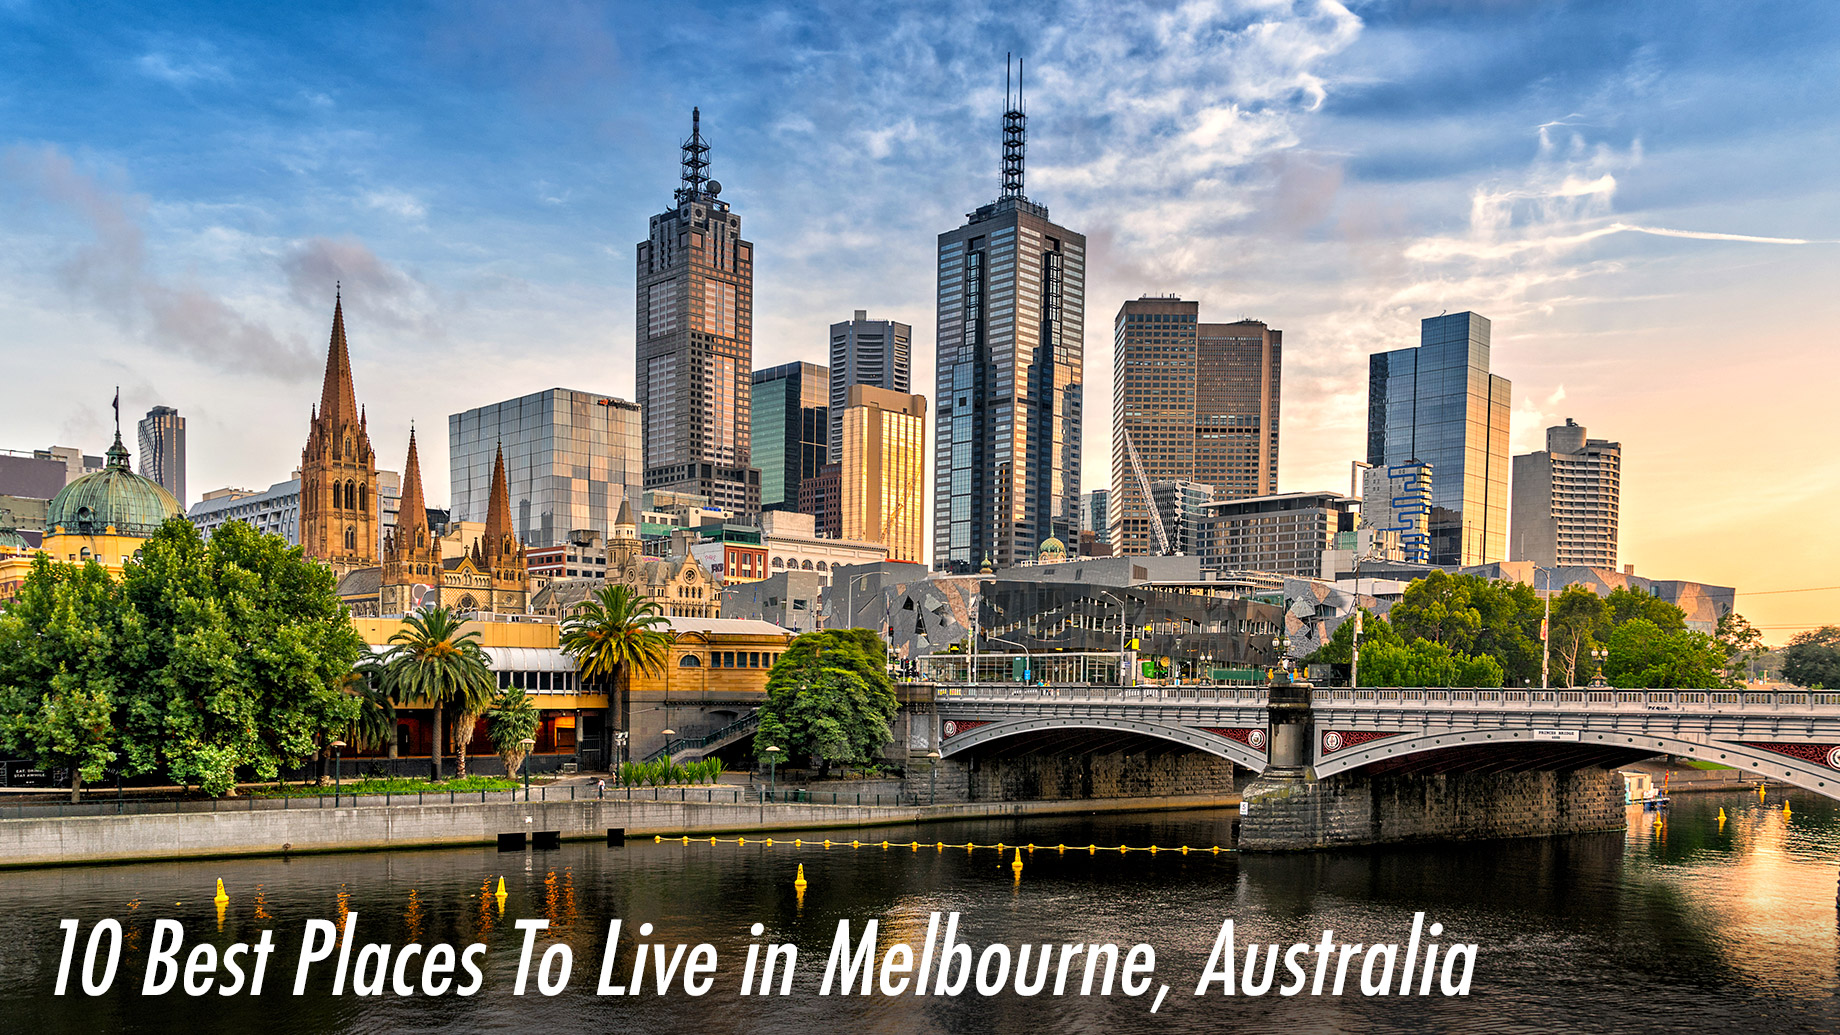 10 Best Places To Live in Melbourne, Australia